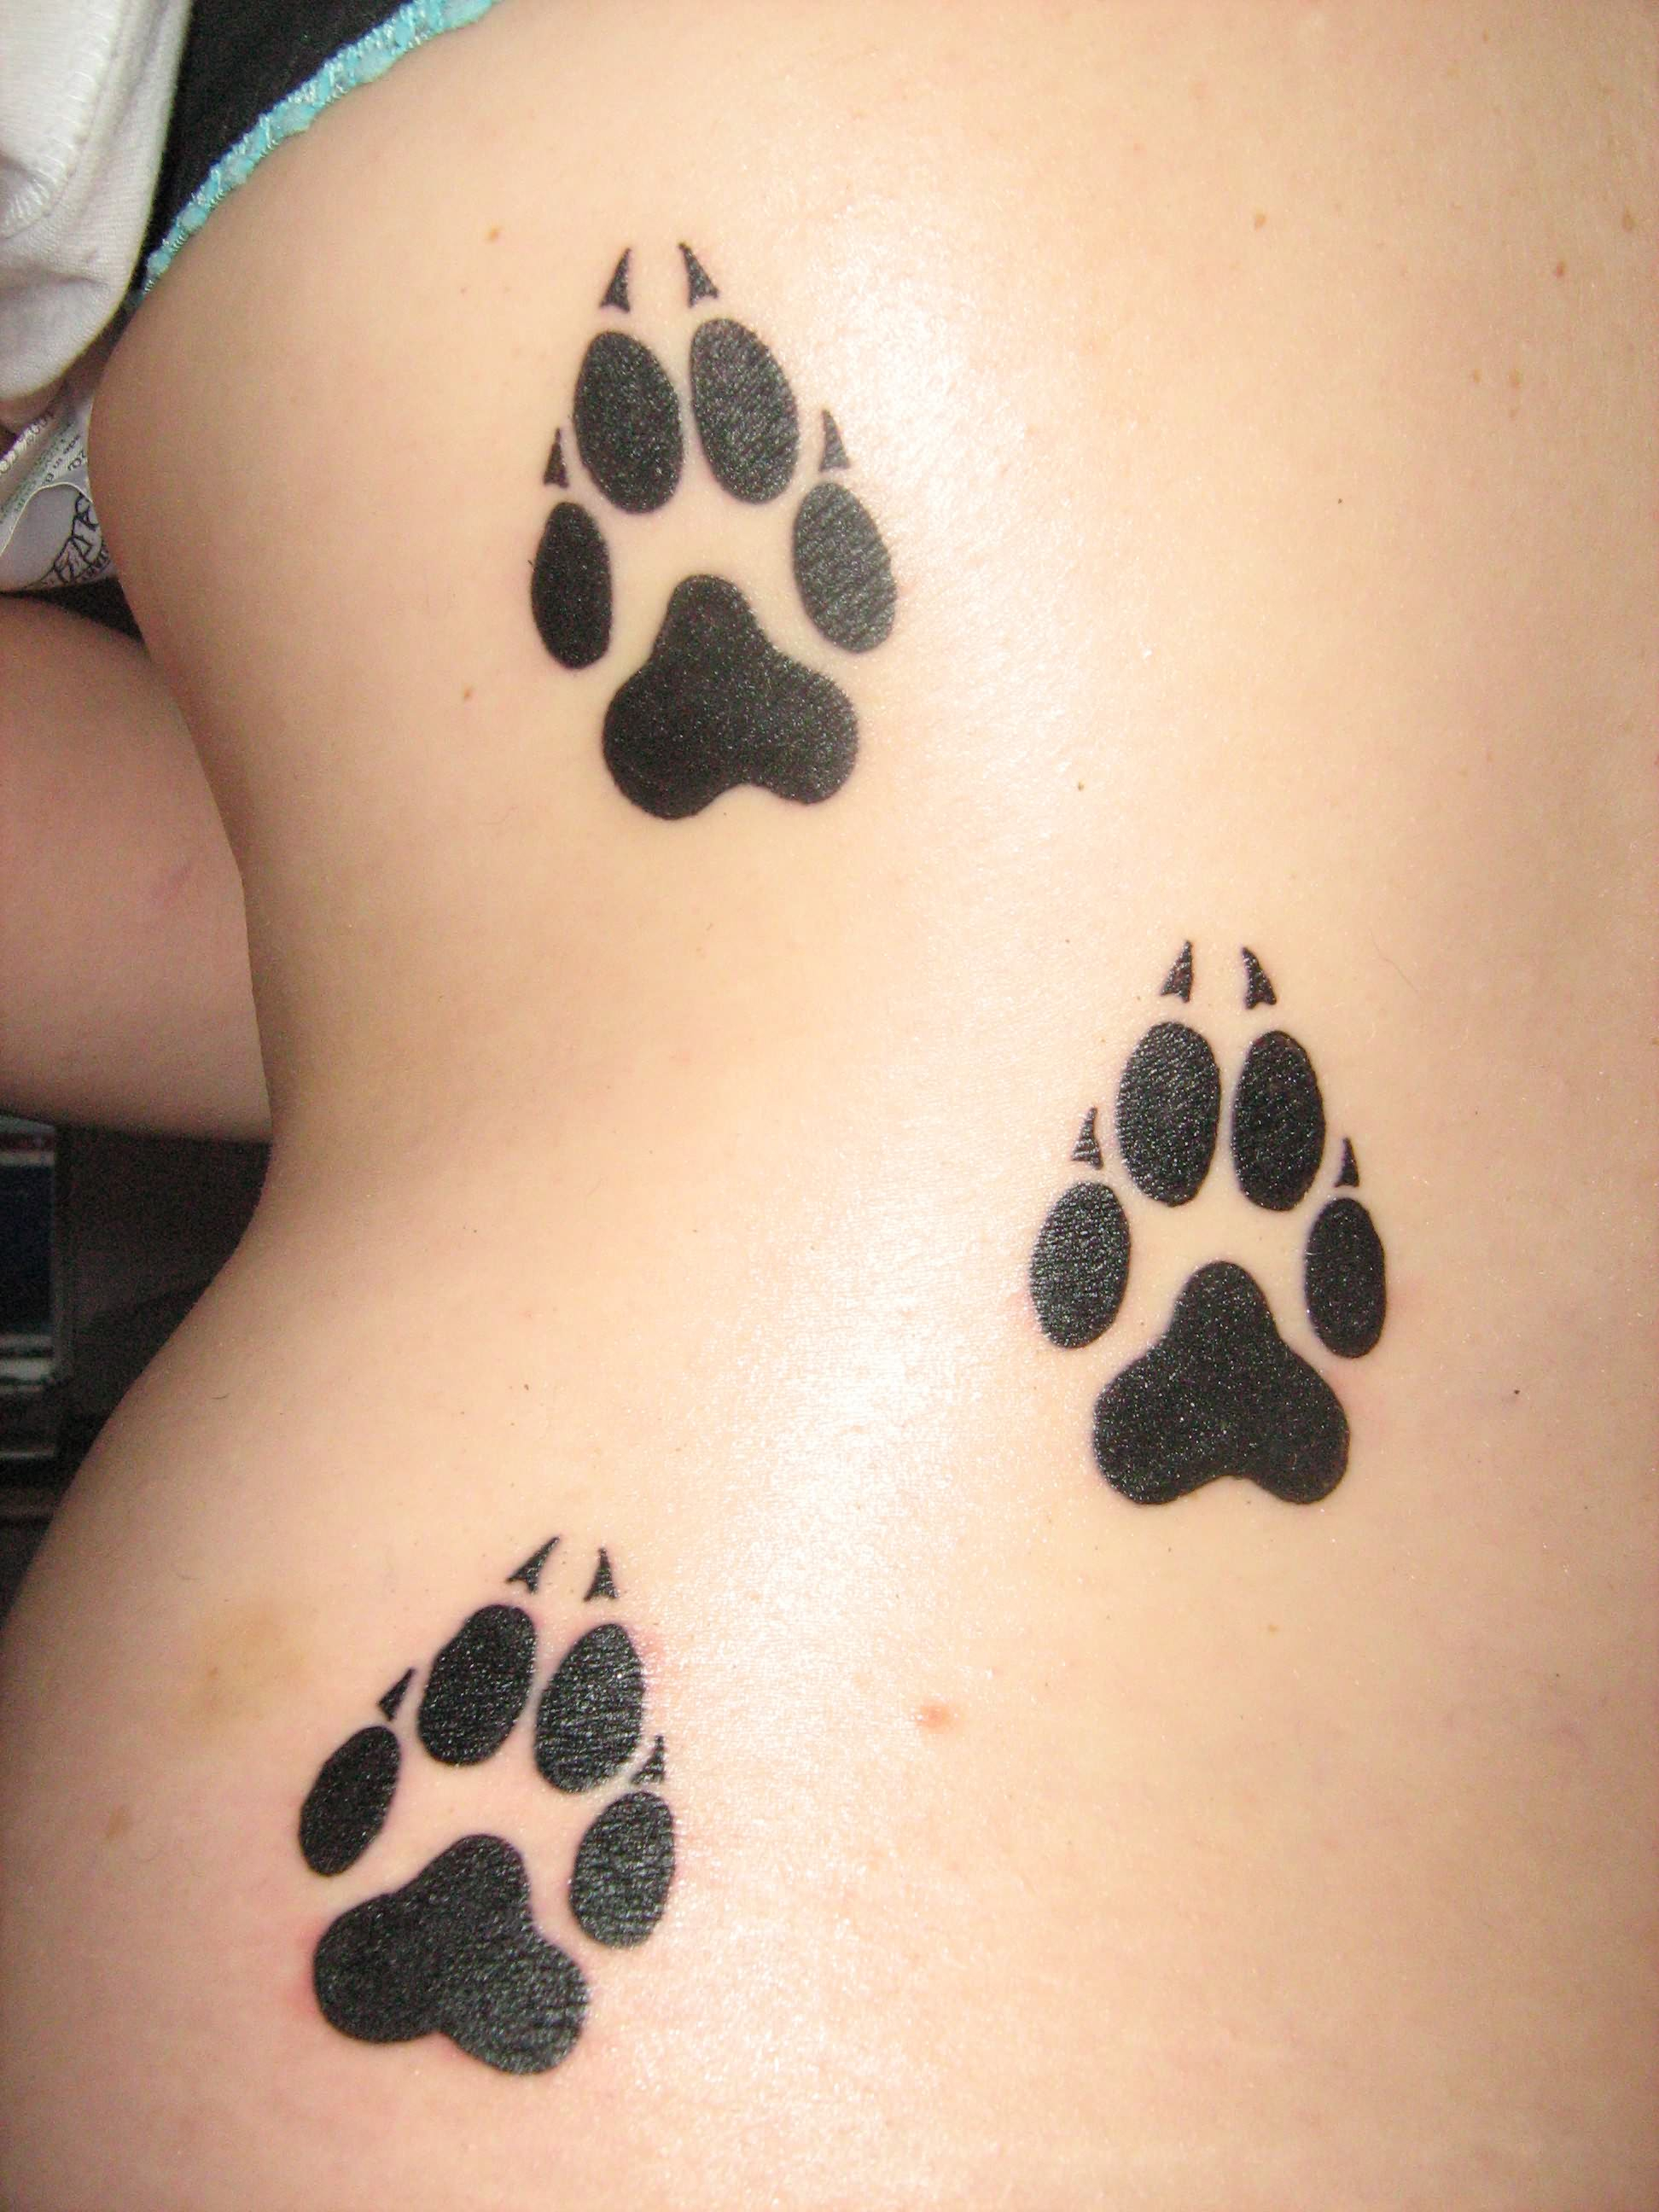 Paw Print Tattoos Designs Ideas And Meaning Tattoos For You pertaining to d...